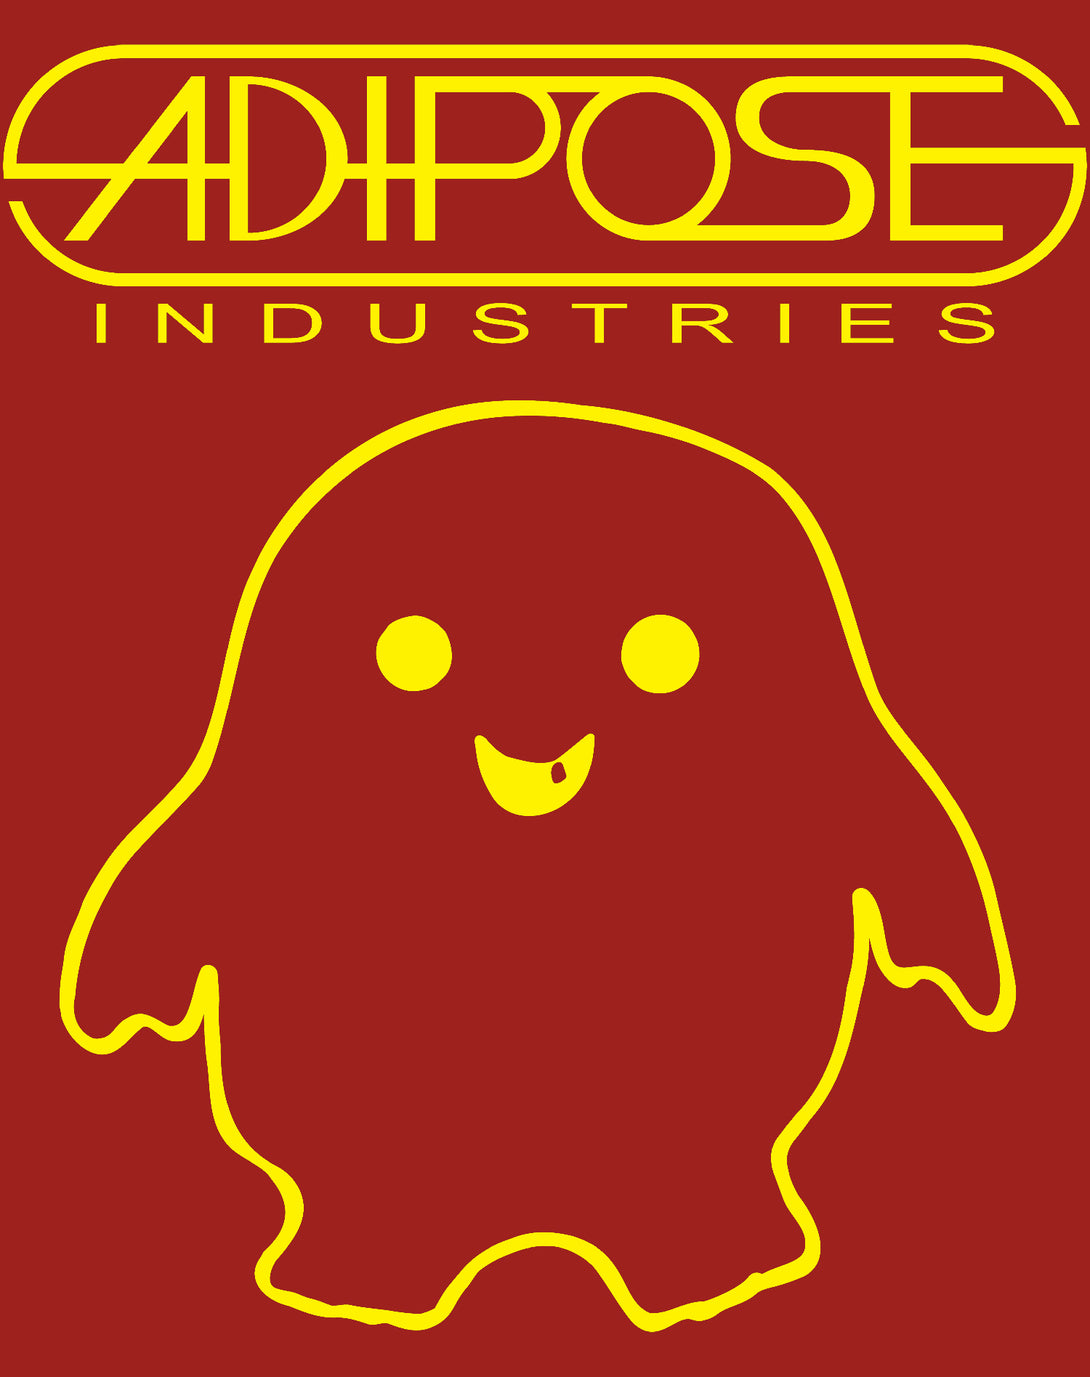 Doctor Who Spacetime-Tour Adipose Official Women's T-shirt Red - Urban Species Design Close Up